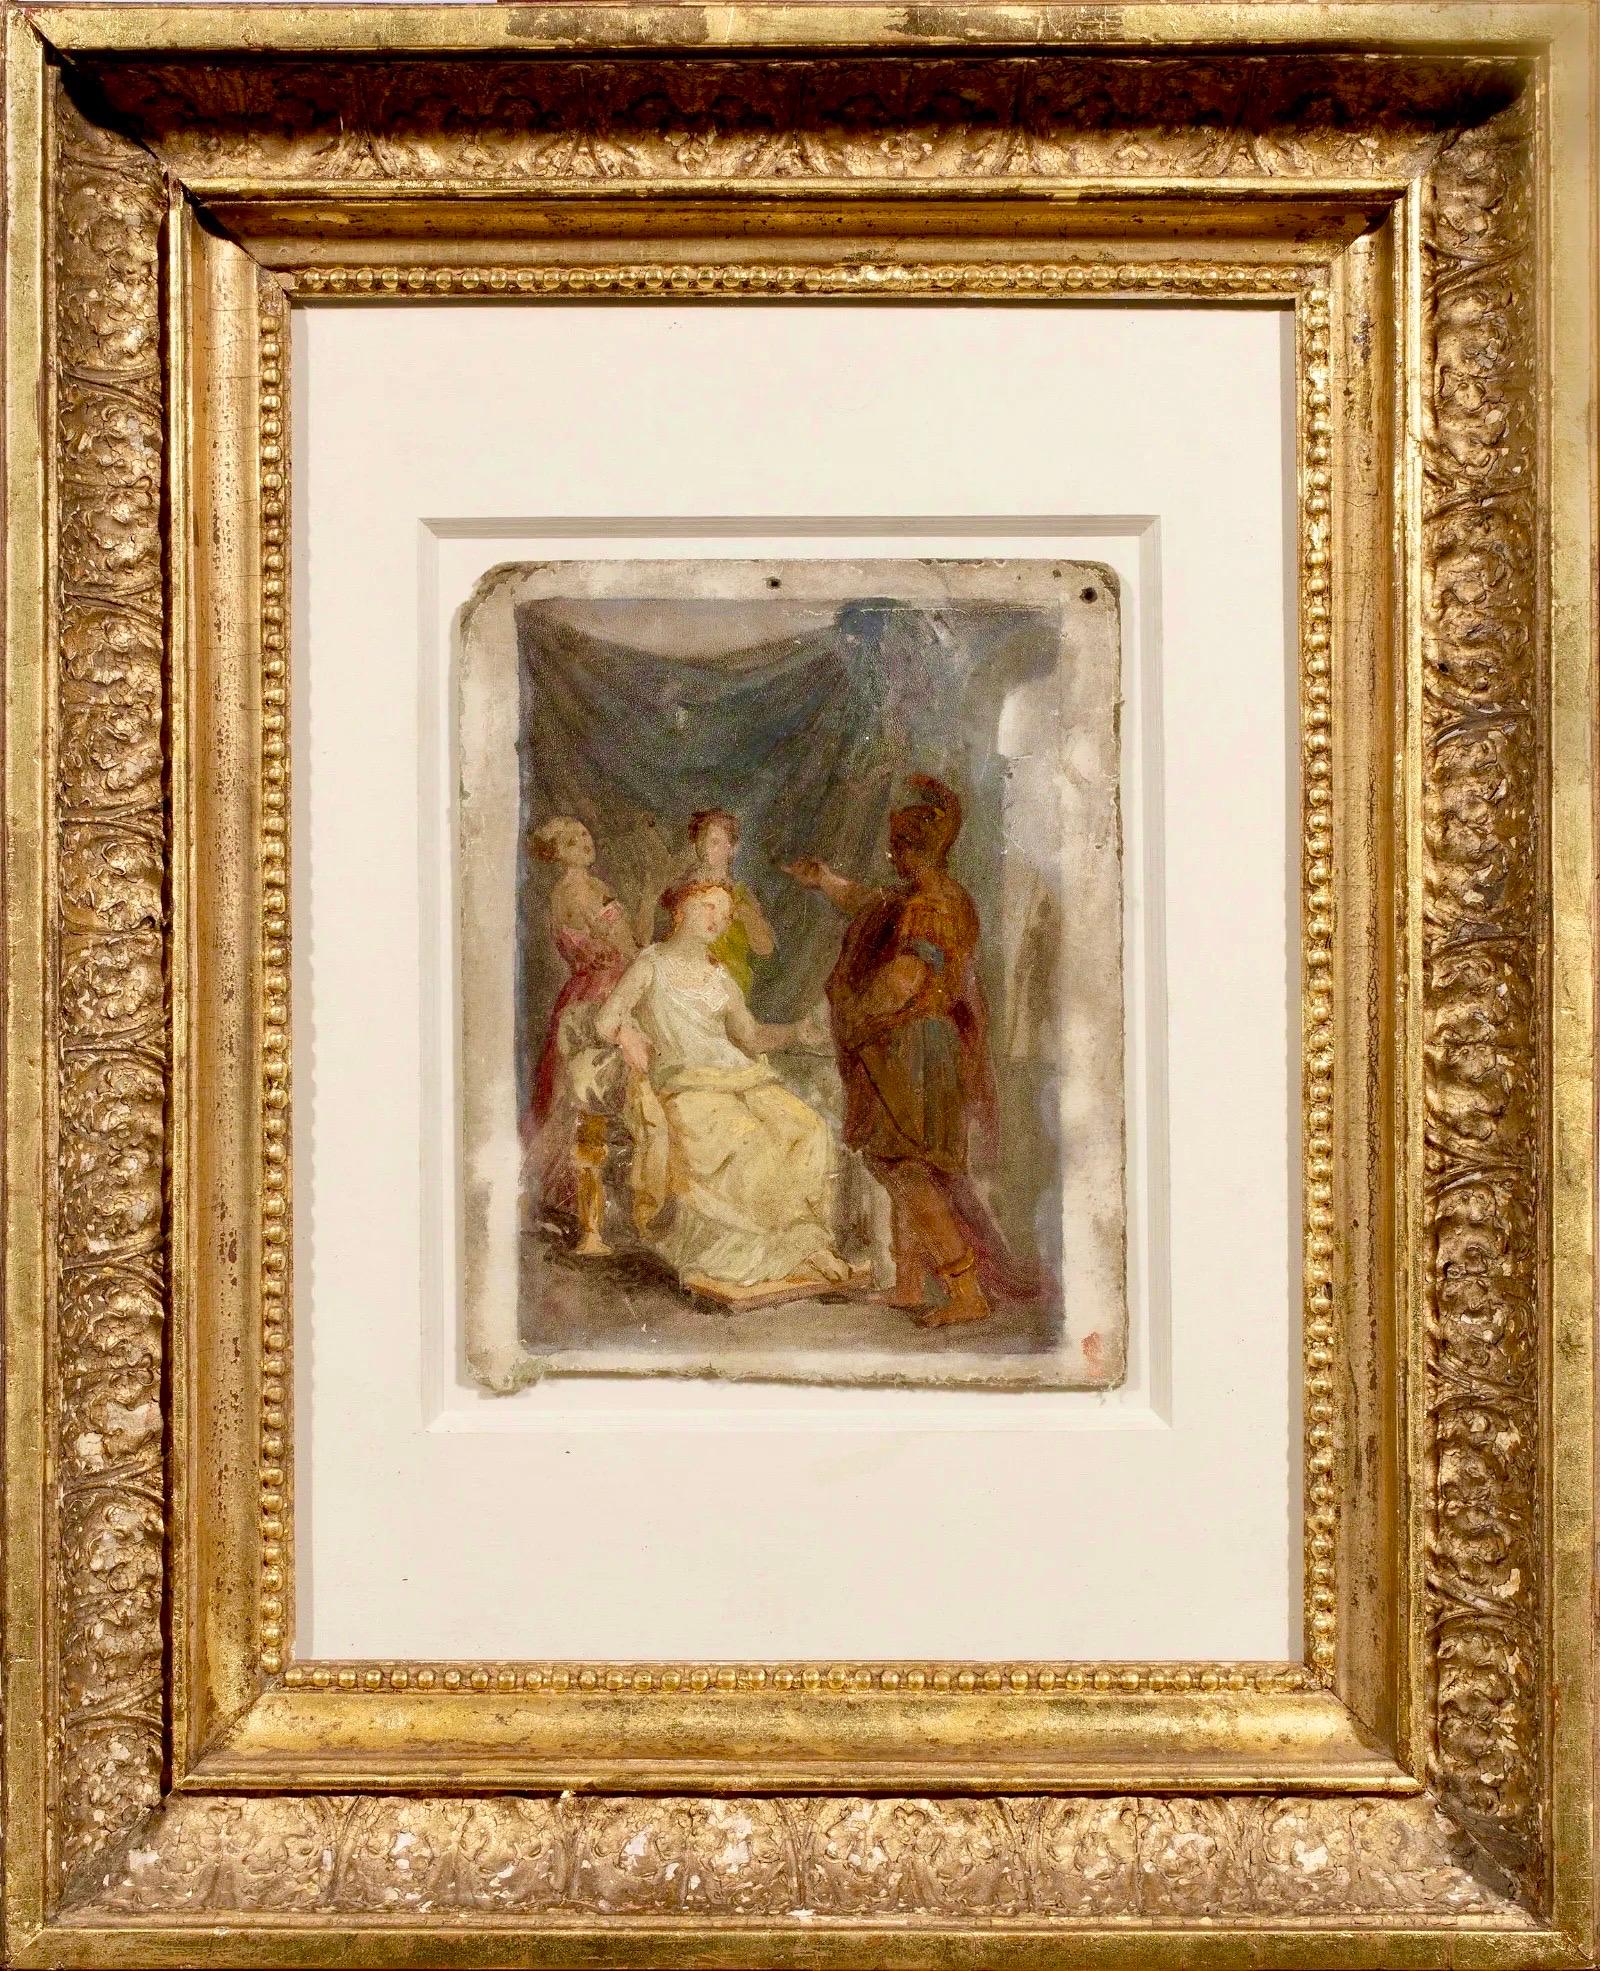 Unknown Figurative Painting - 18 / 19th century French mythological oil sketch - Aenas and Dido - Love